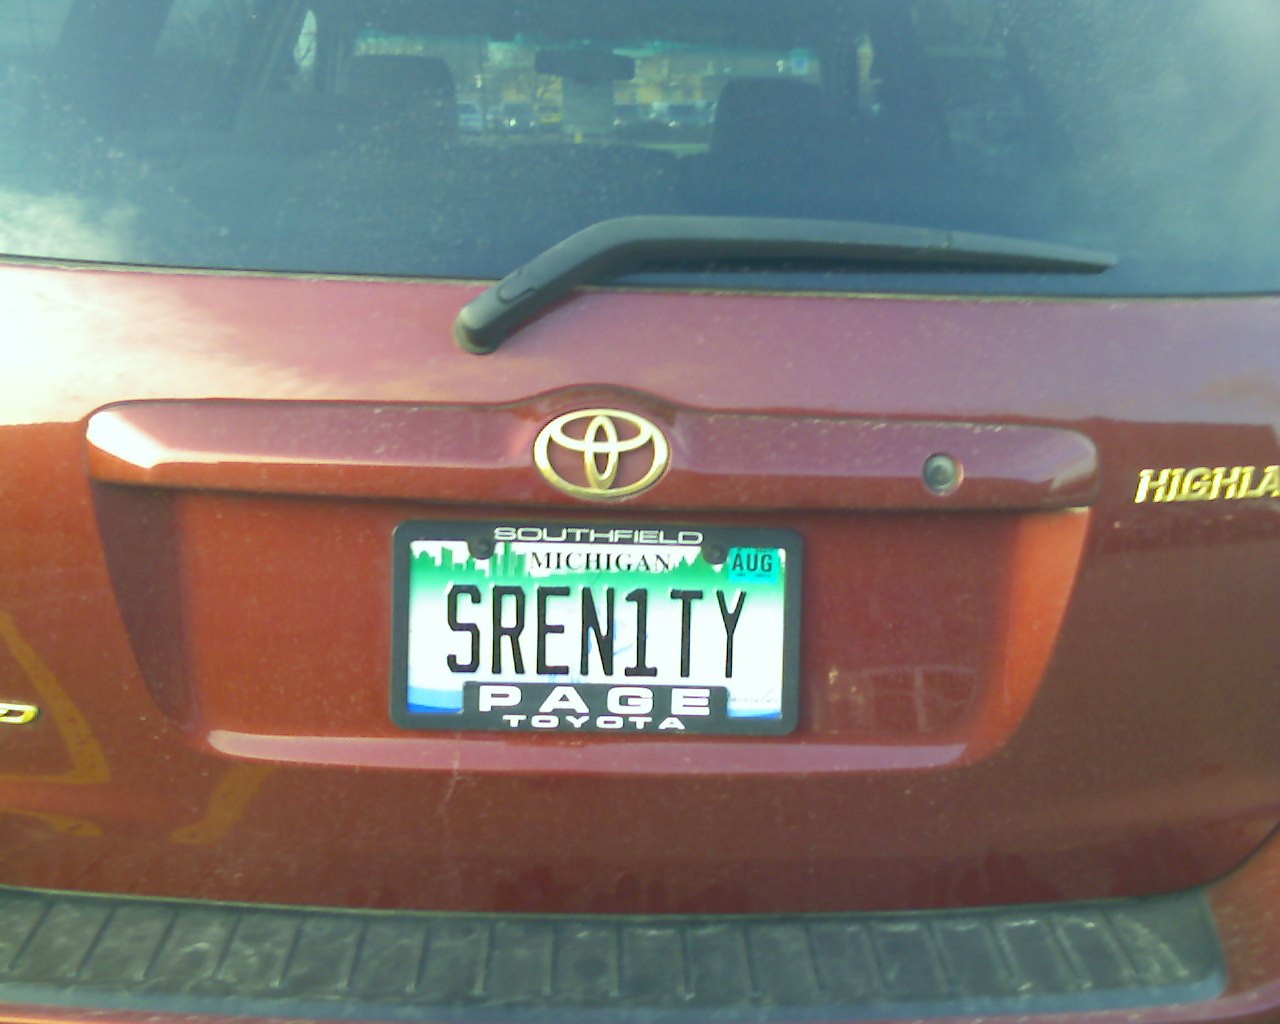 the license plate on the front of a car